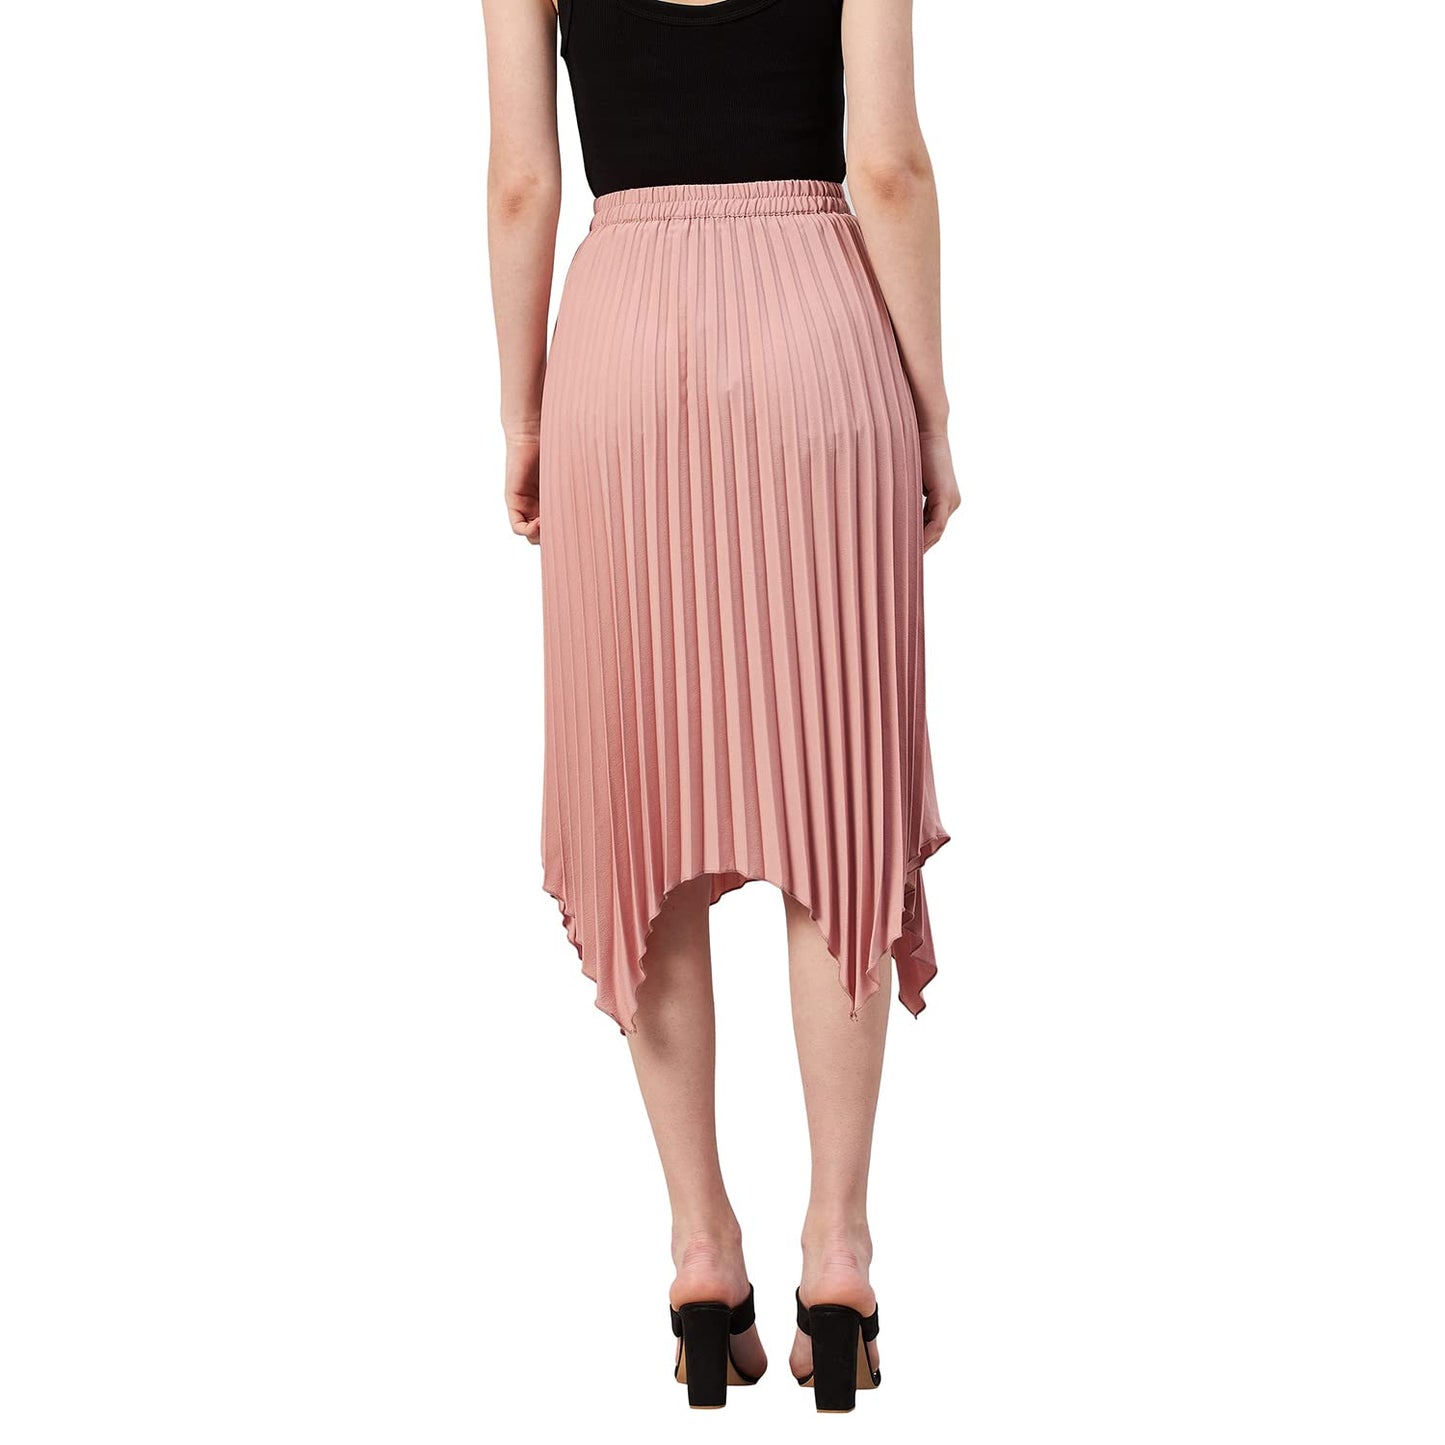 Marie Claire Women Casual Peach Colour Solid A-Line Skirt